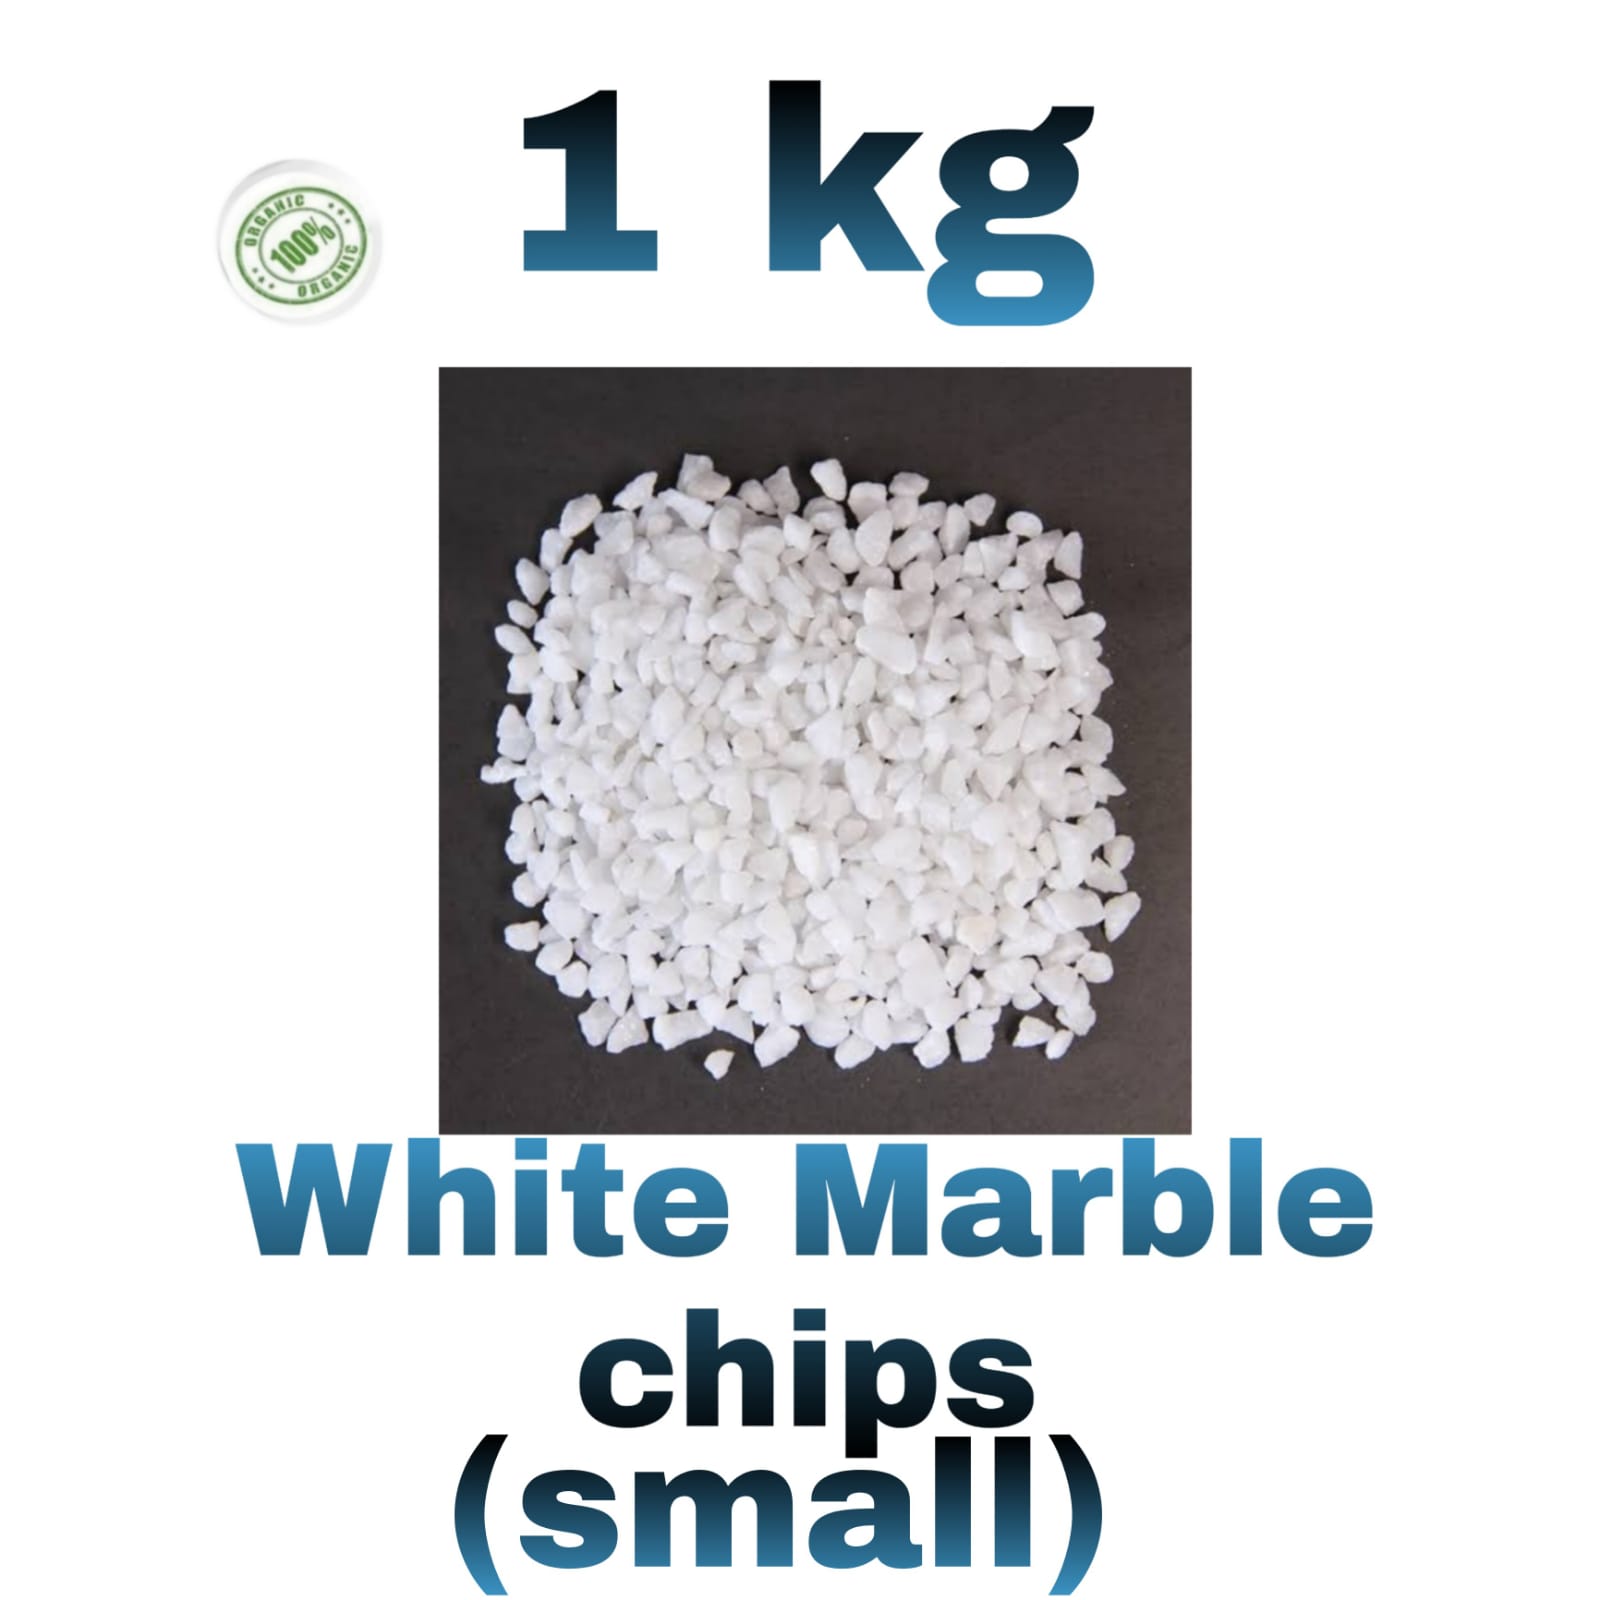 WHITE MARBLE CHIPS (SMALL) 1 KG